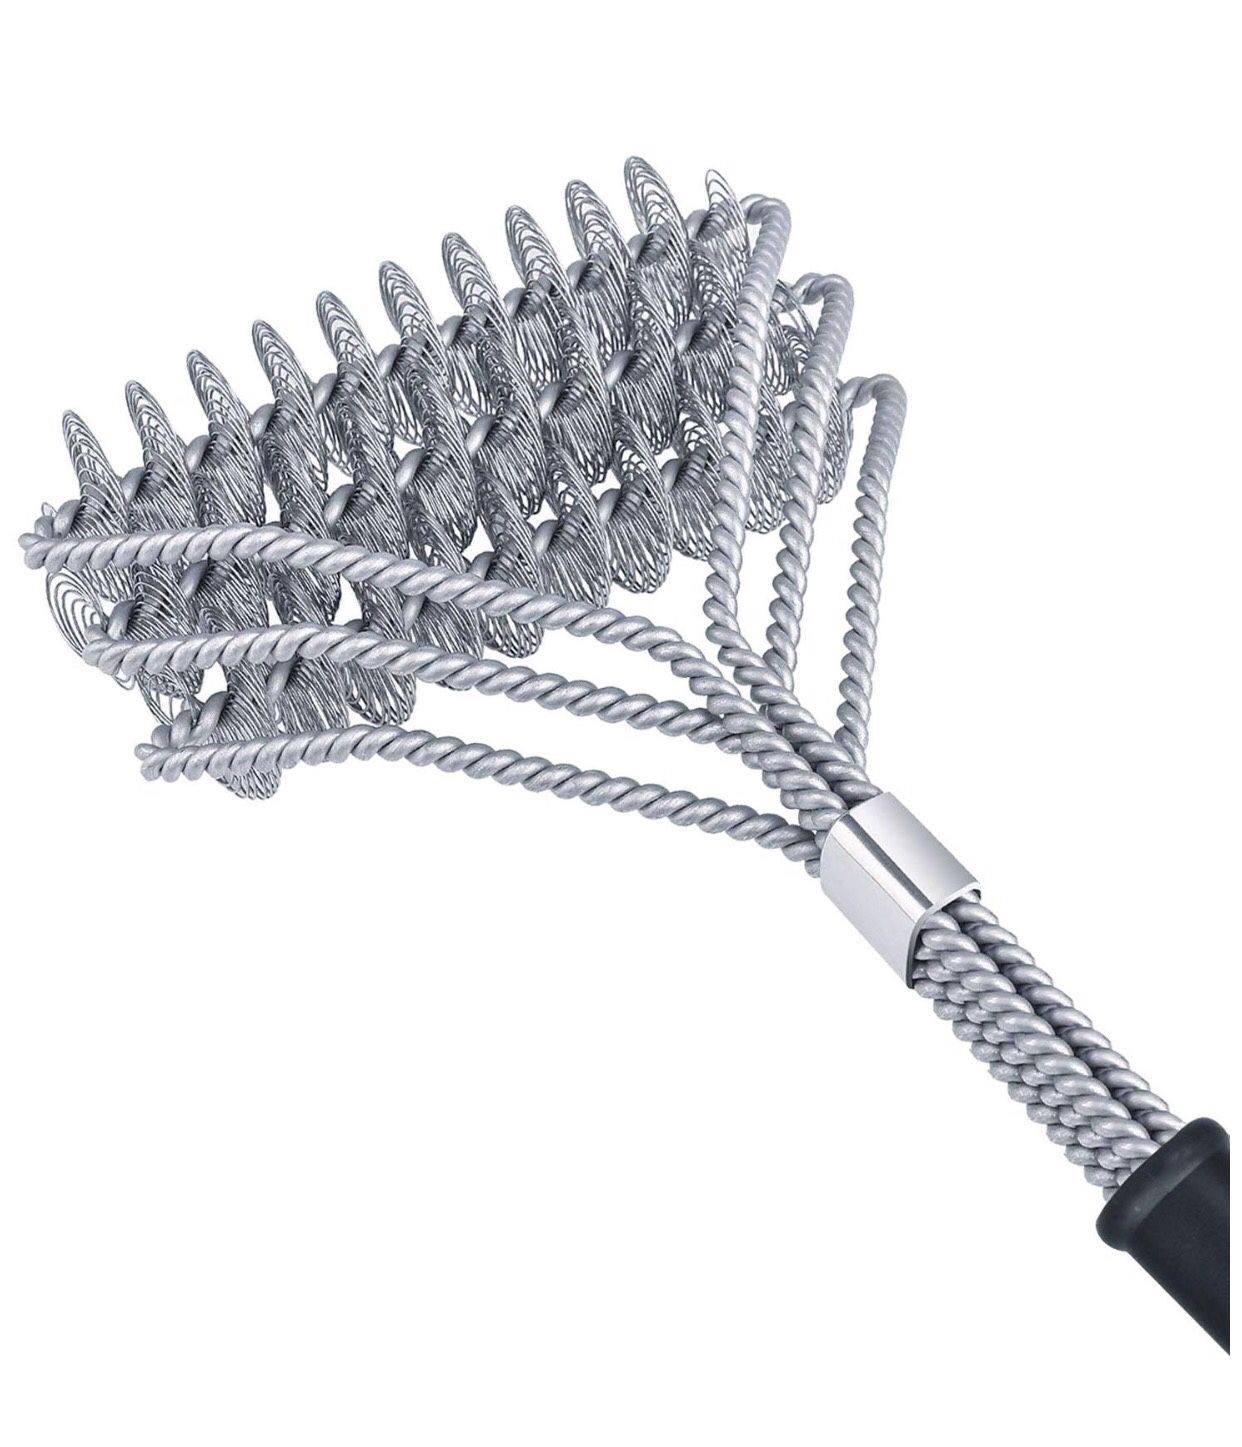 LT&PK Grill Brush BBQ Cleaning Scraper - 18'' Long Handle 3 in 1 Stainless Steel BBQ Grill Cleaning Brush - Barbecue Grill Cleaner for Porcelain,Prop